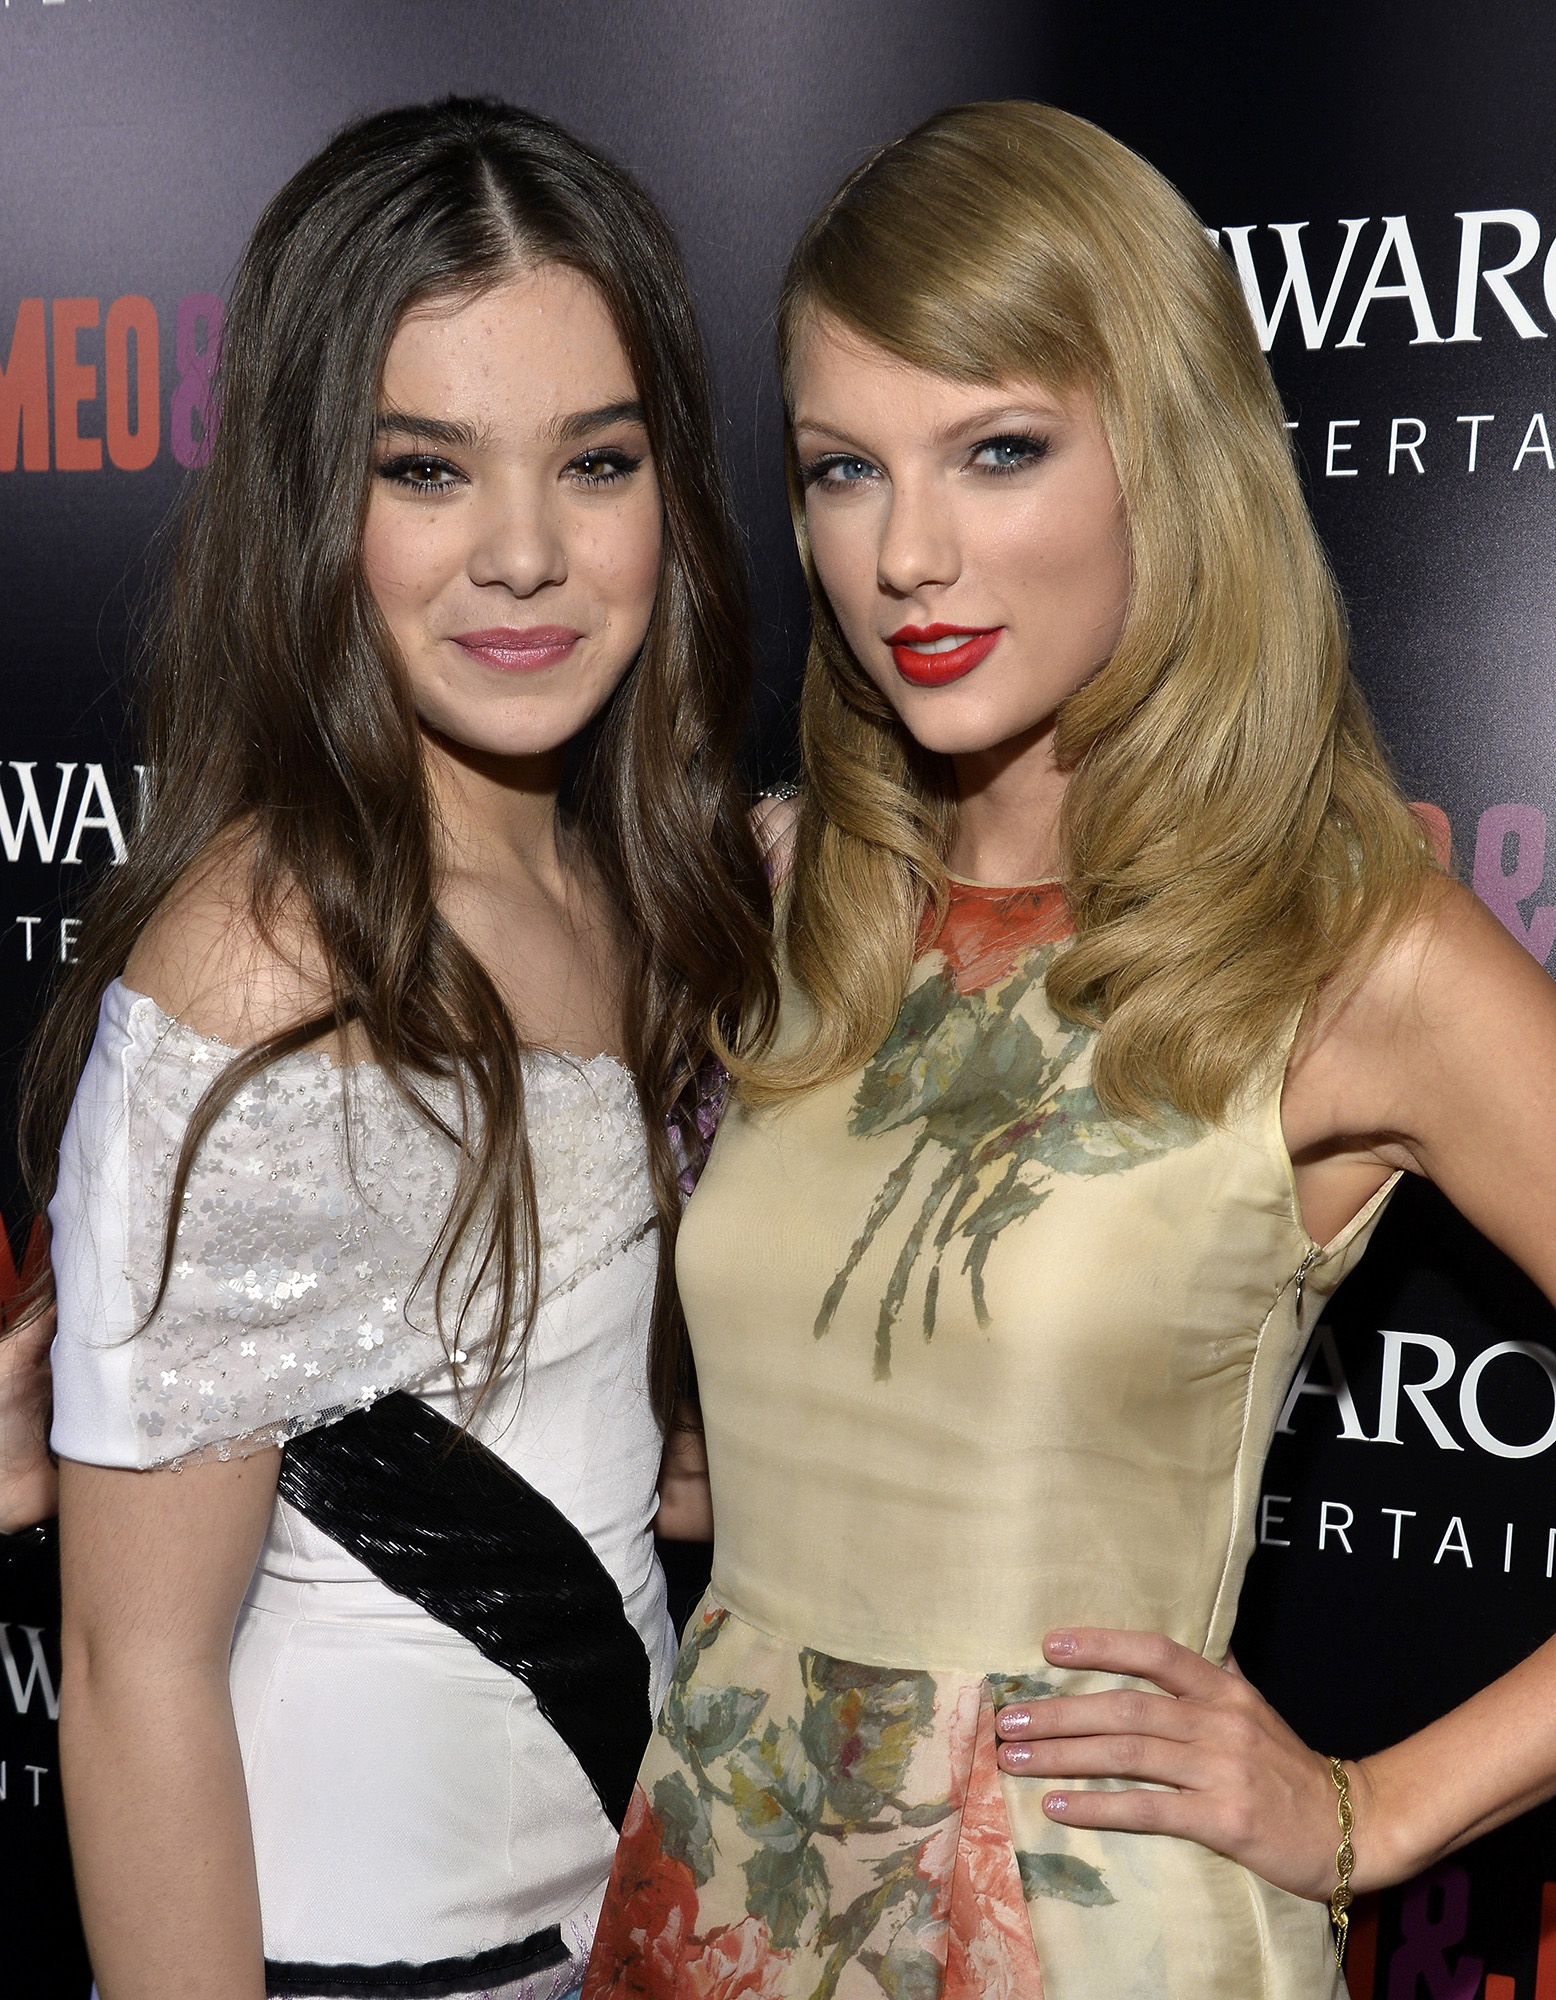 Did Hailee Steinfeld Just Throw Shade At Taylor Swifts Girl Squad